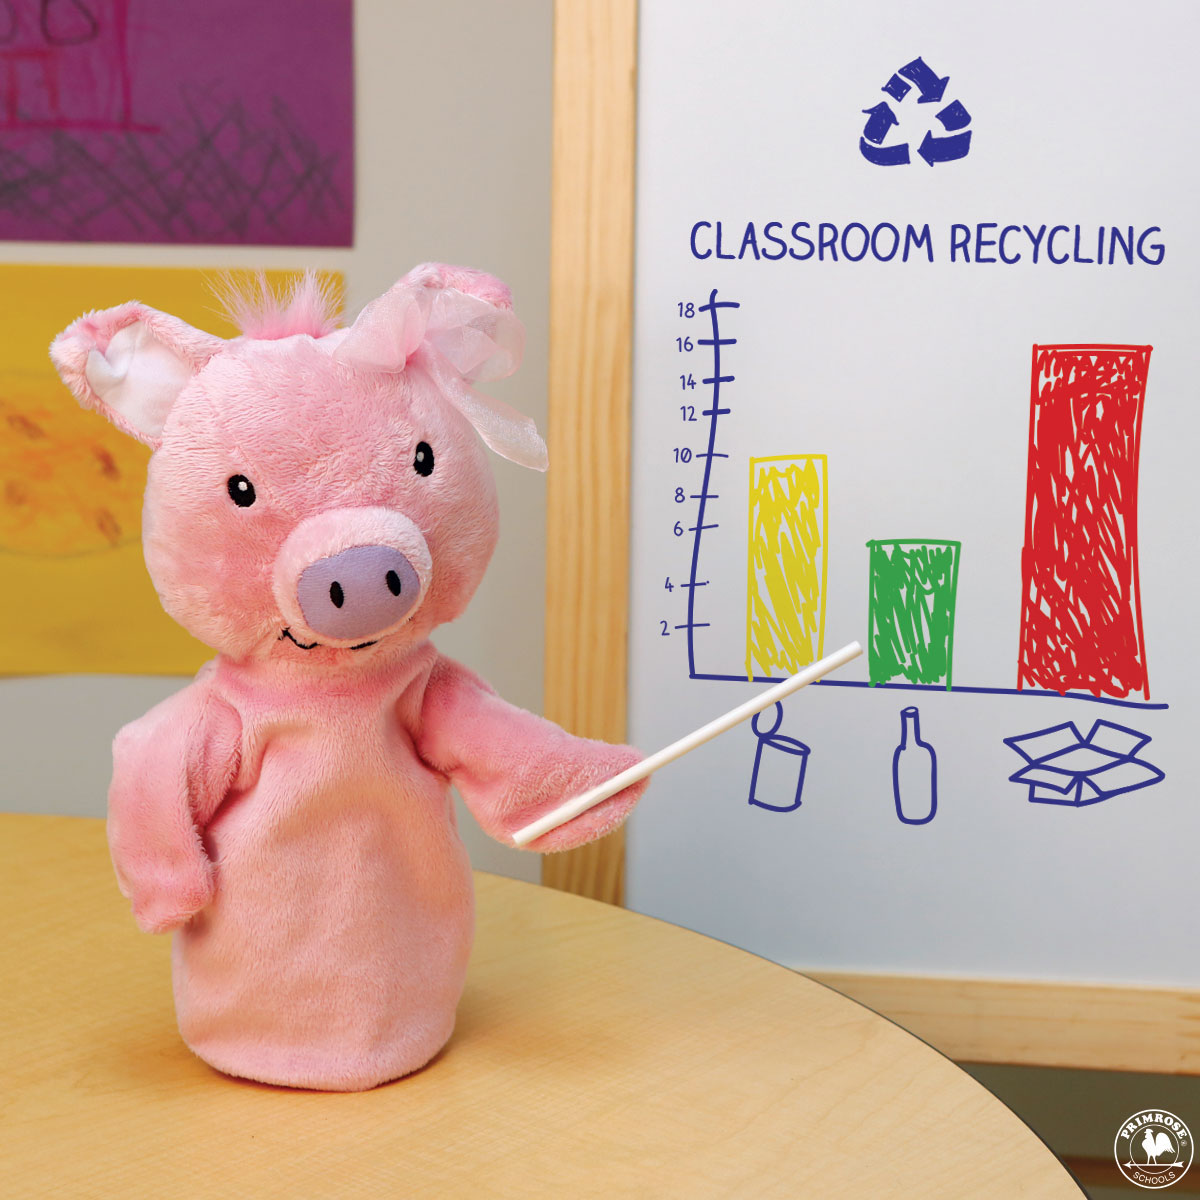 Primrose puppet Megy the pig points to a graph about classroom recycling